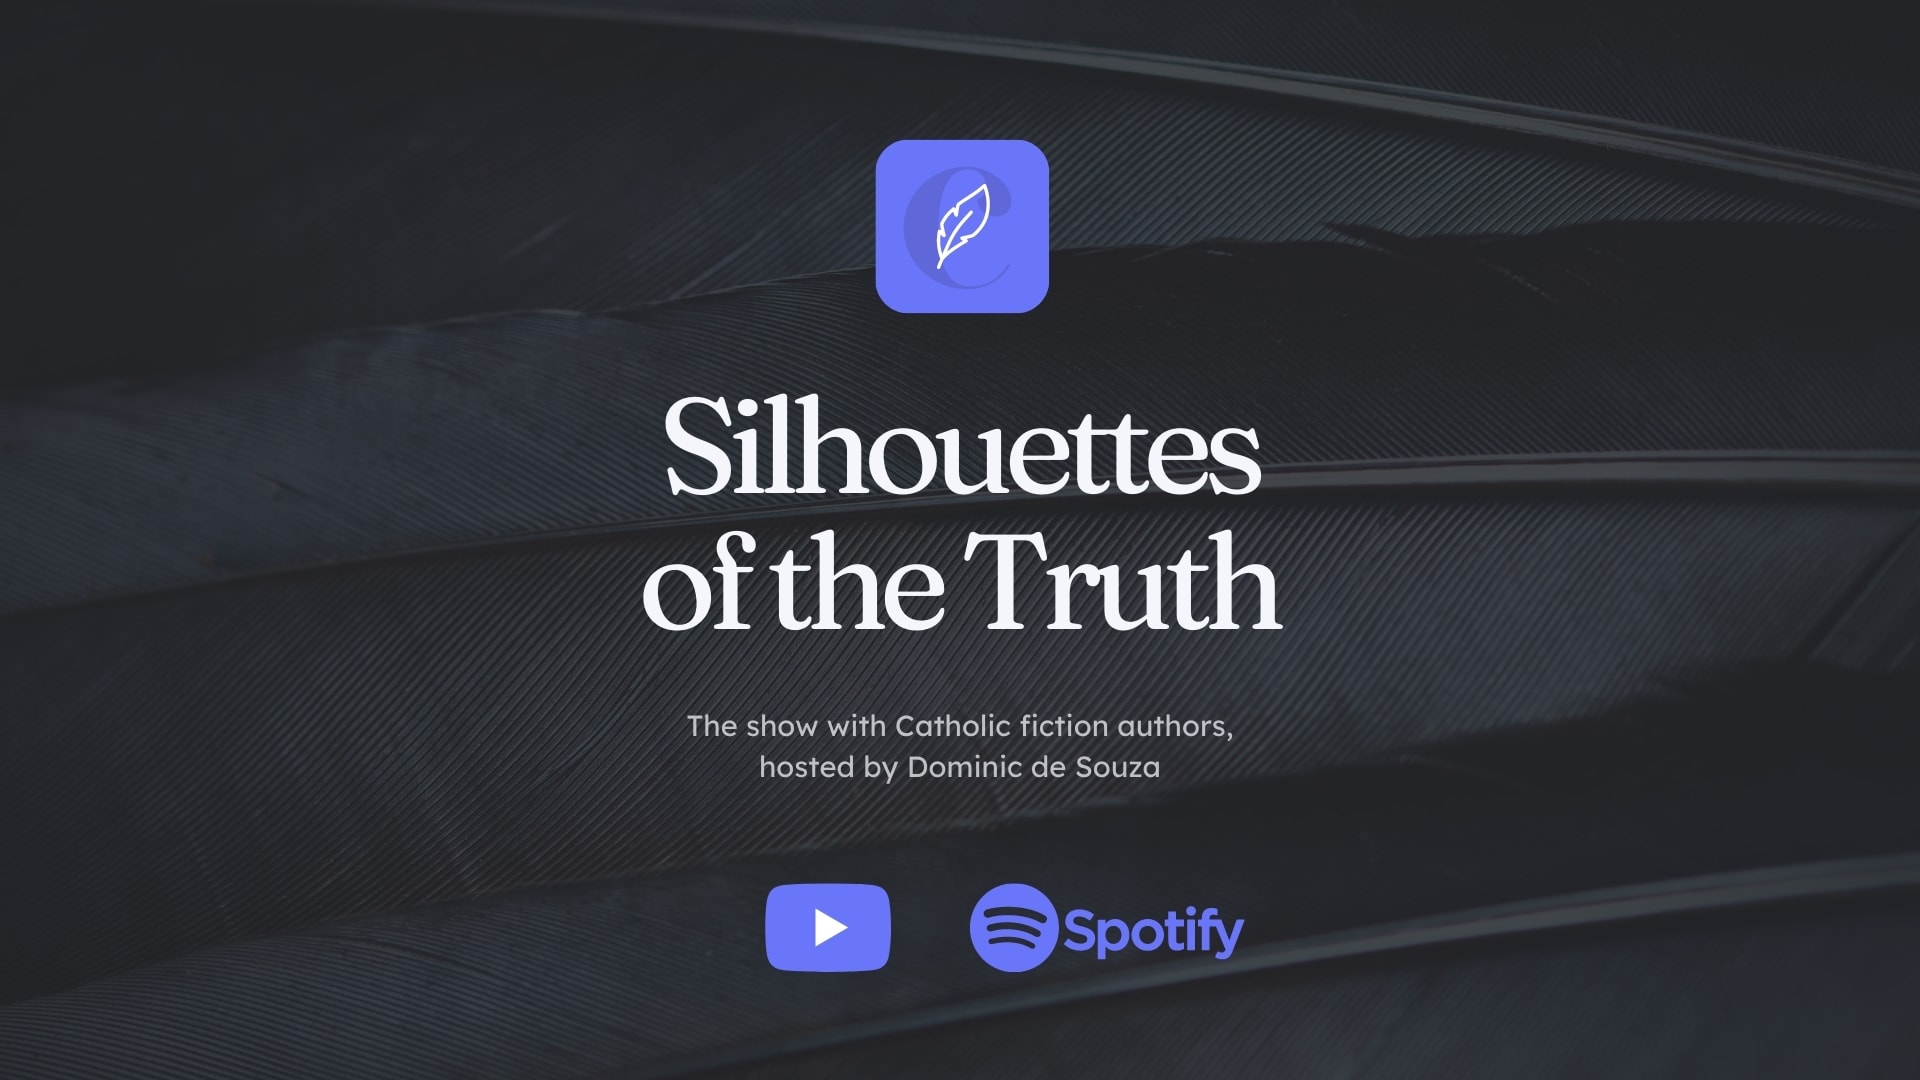 Announcing: The new YouTube show Silhouettes of the Truth